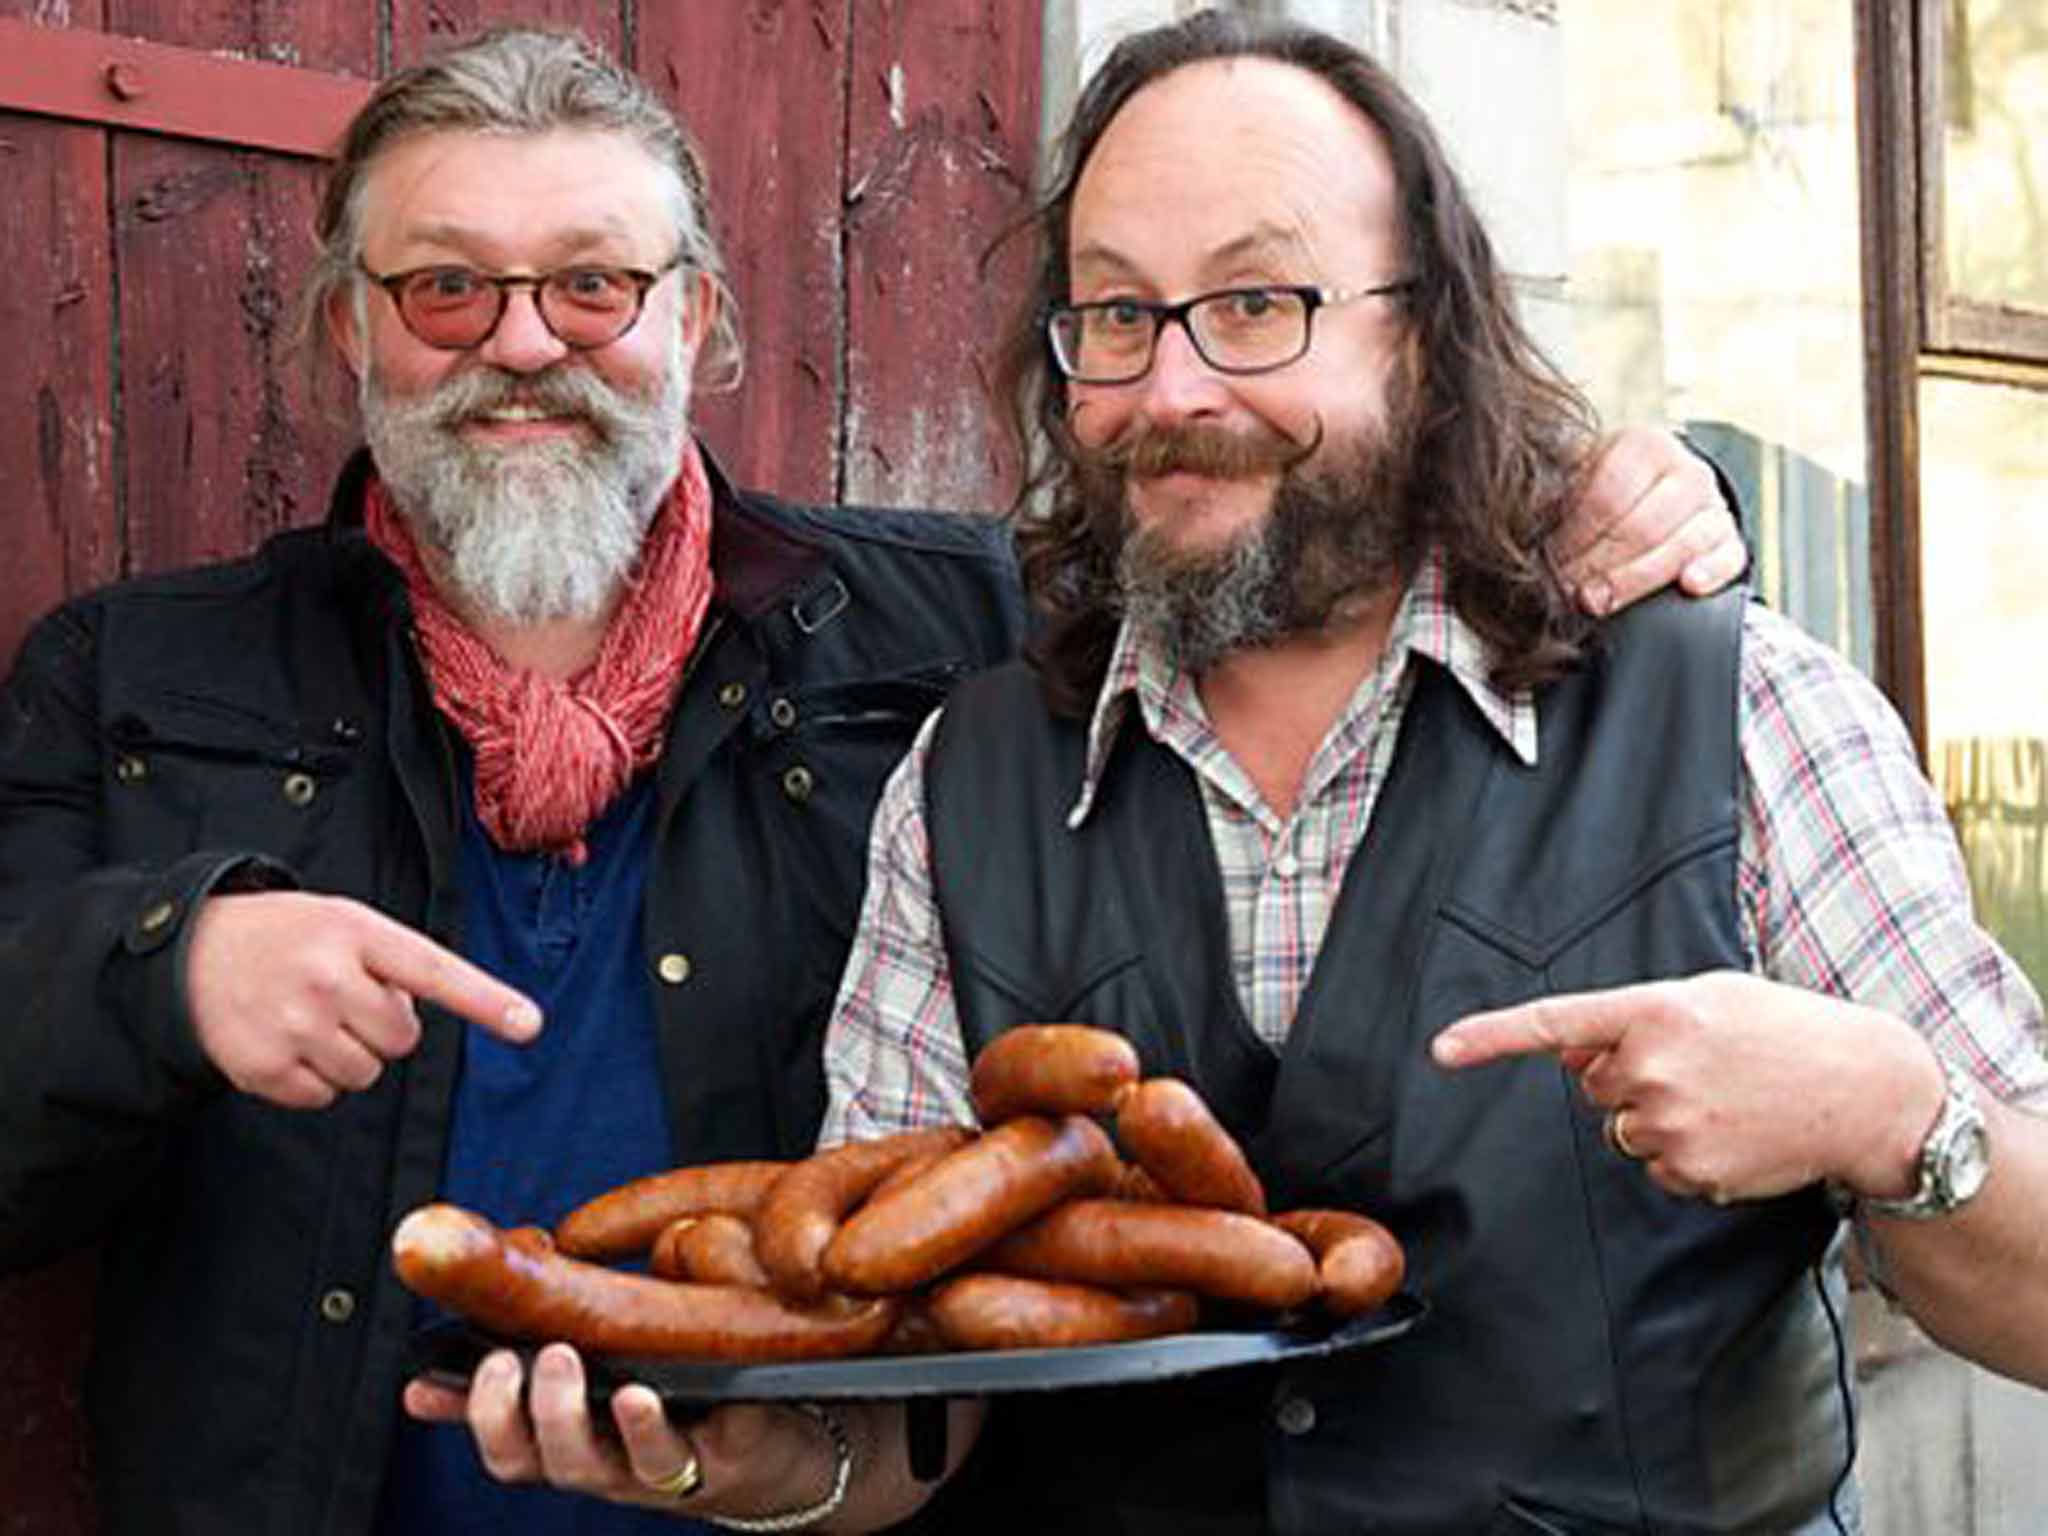 The Hairy Bikers' Northern Exposure: A bit of a sausage fest